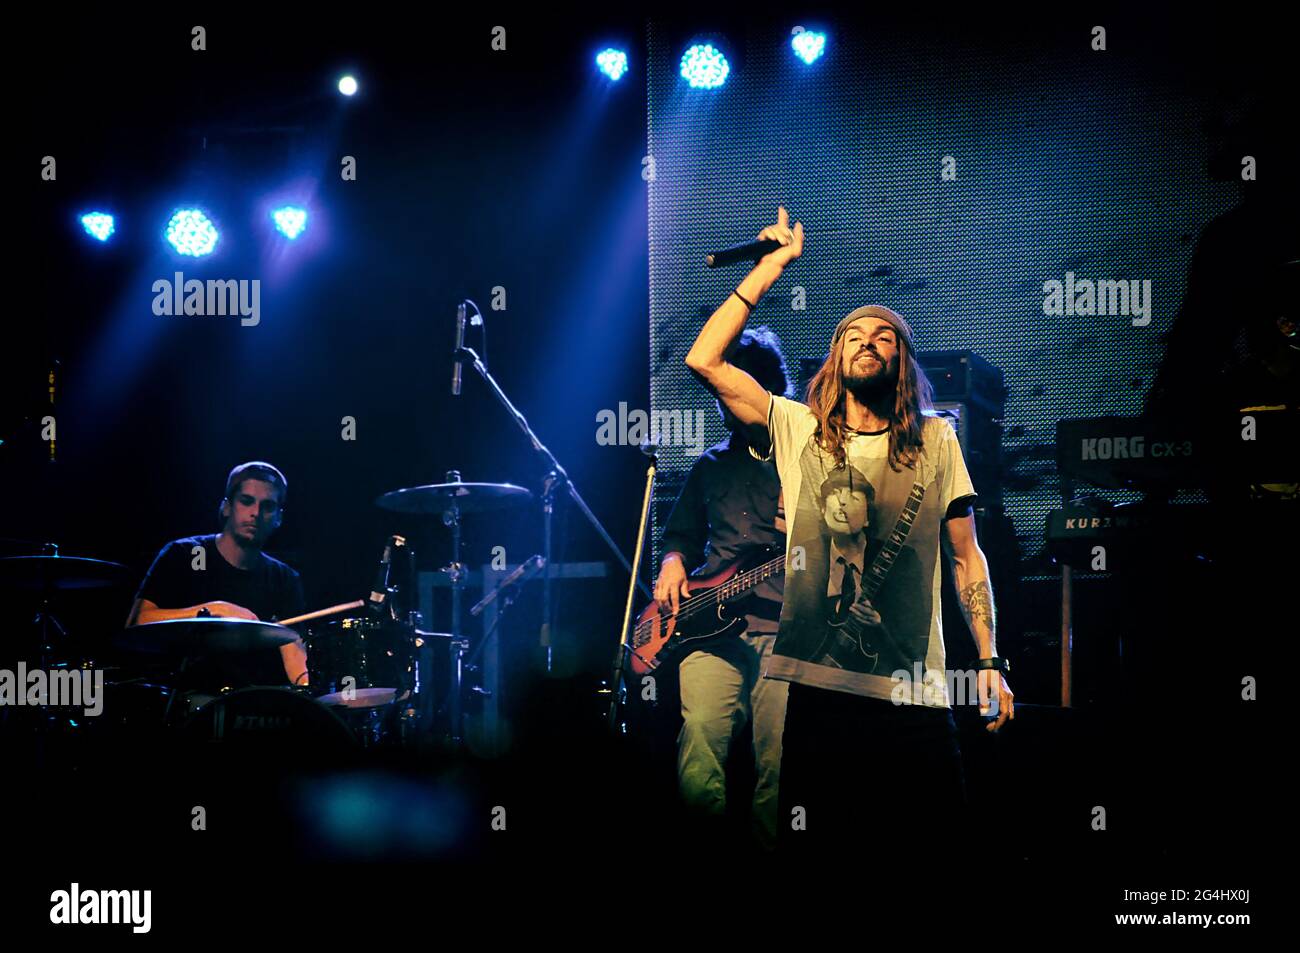 Armandinho and his band in live concert in Groove, Buenos Aires, Argentina (August 17, 2014). Stock Photo